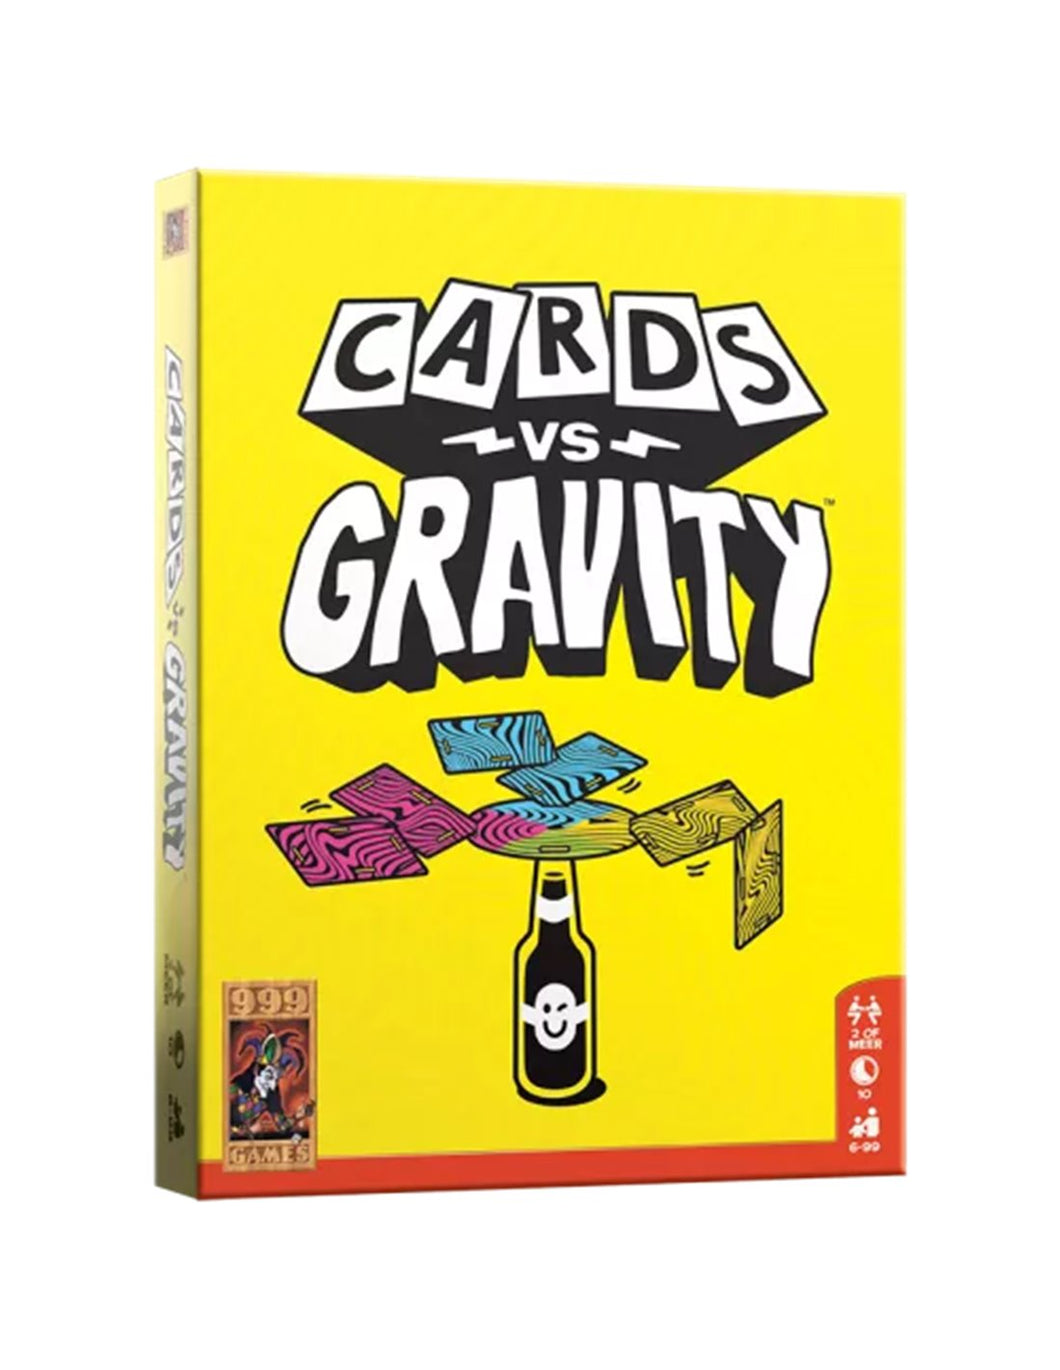 Available now - Cards V Gravity - NEW!